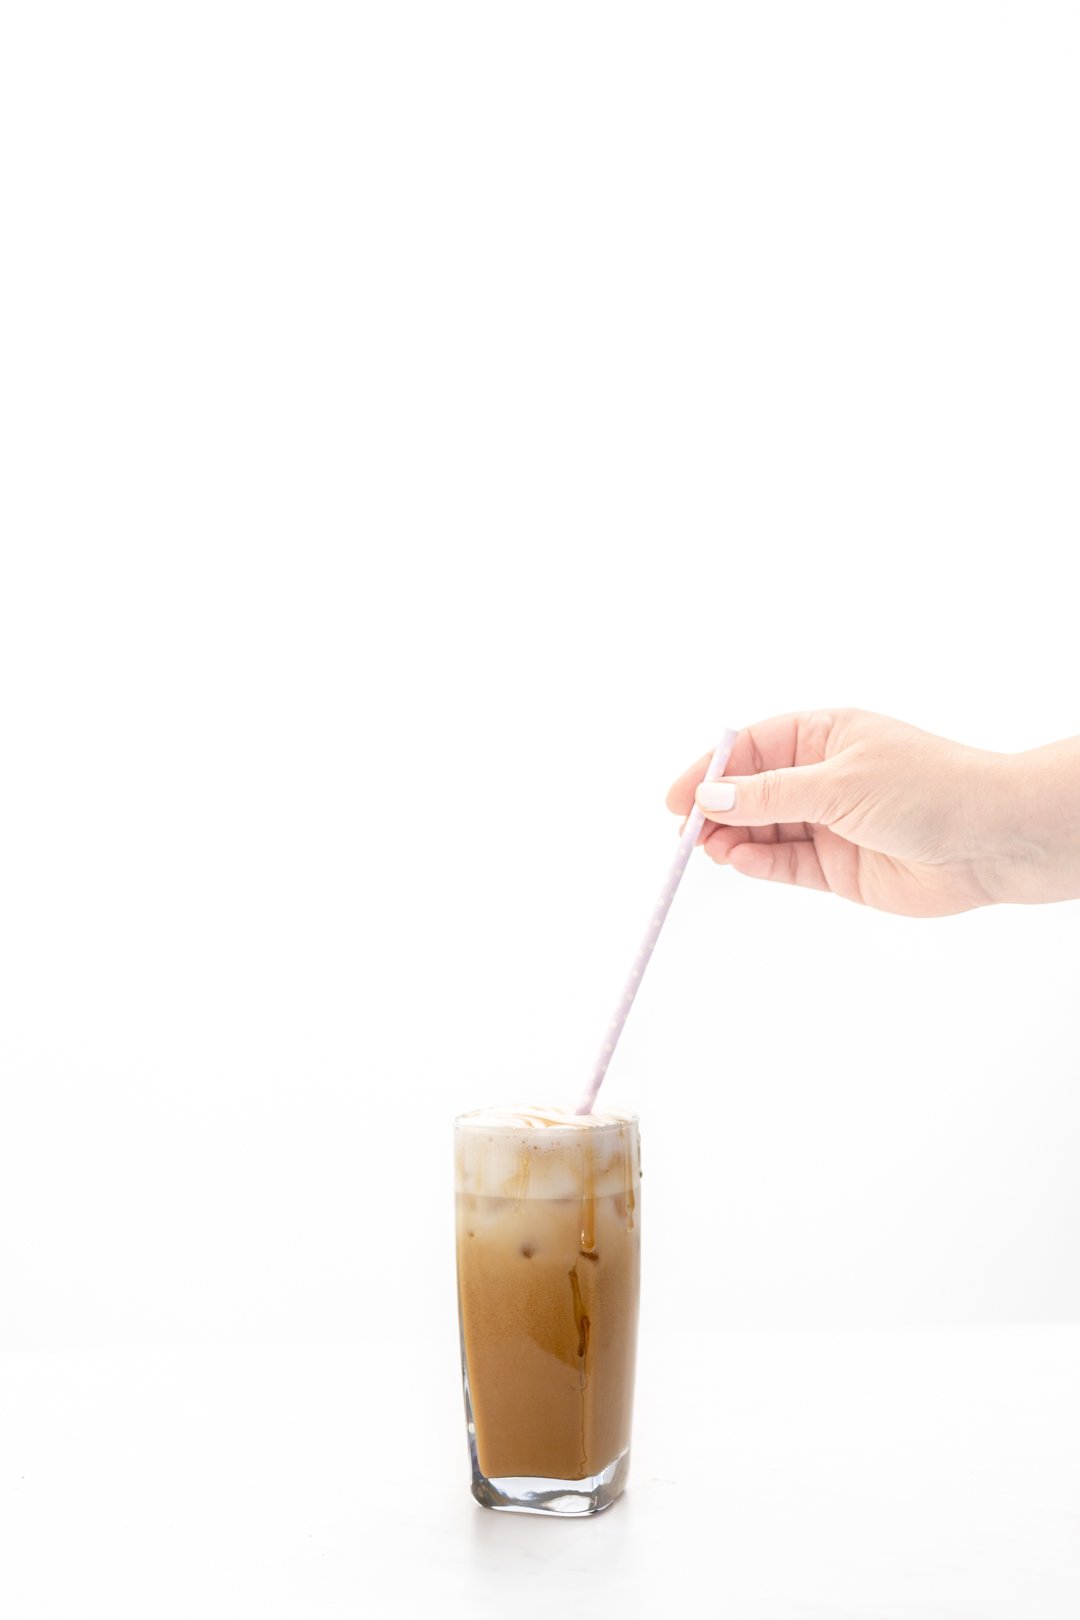 iced coffee with straw